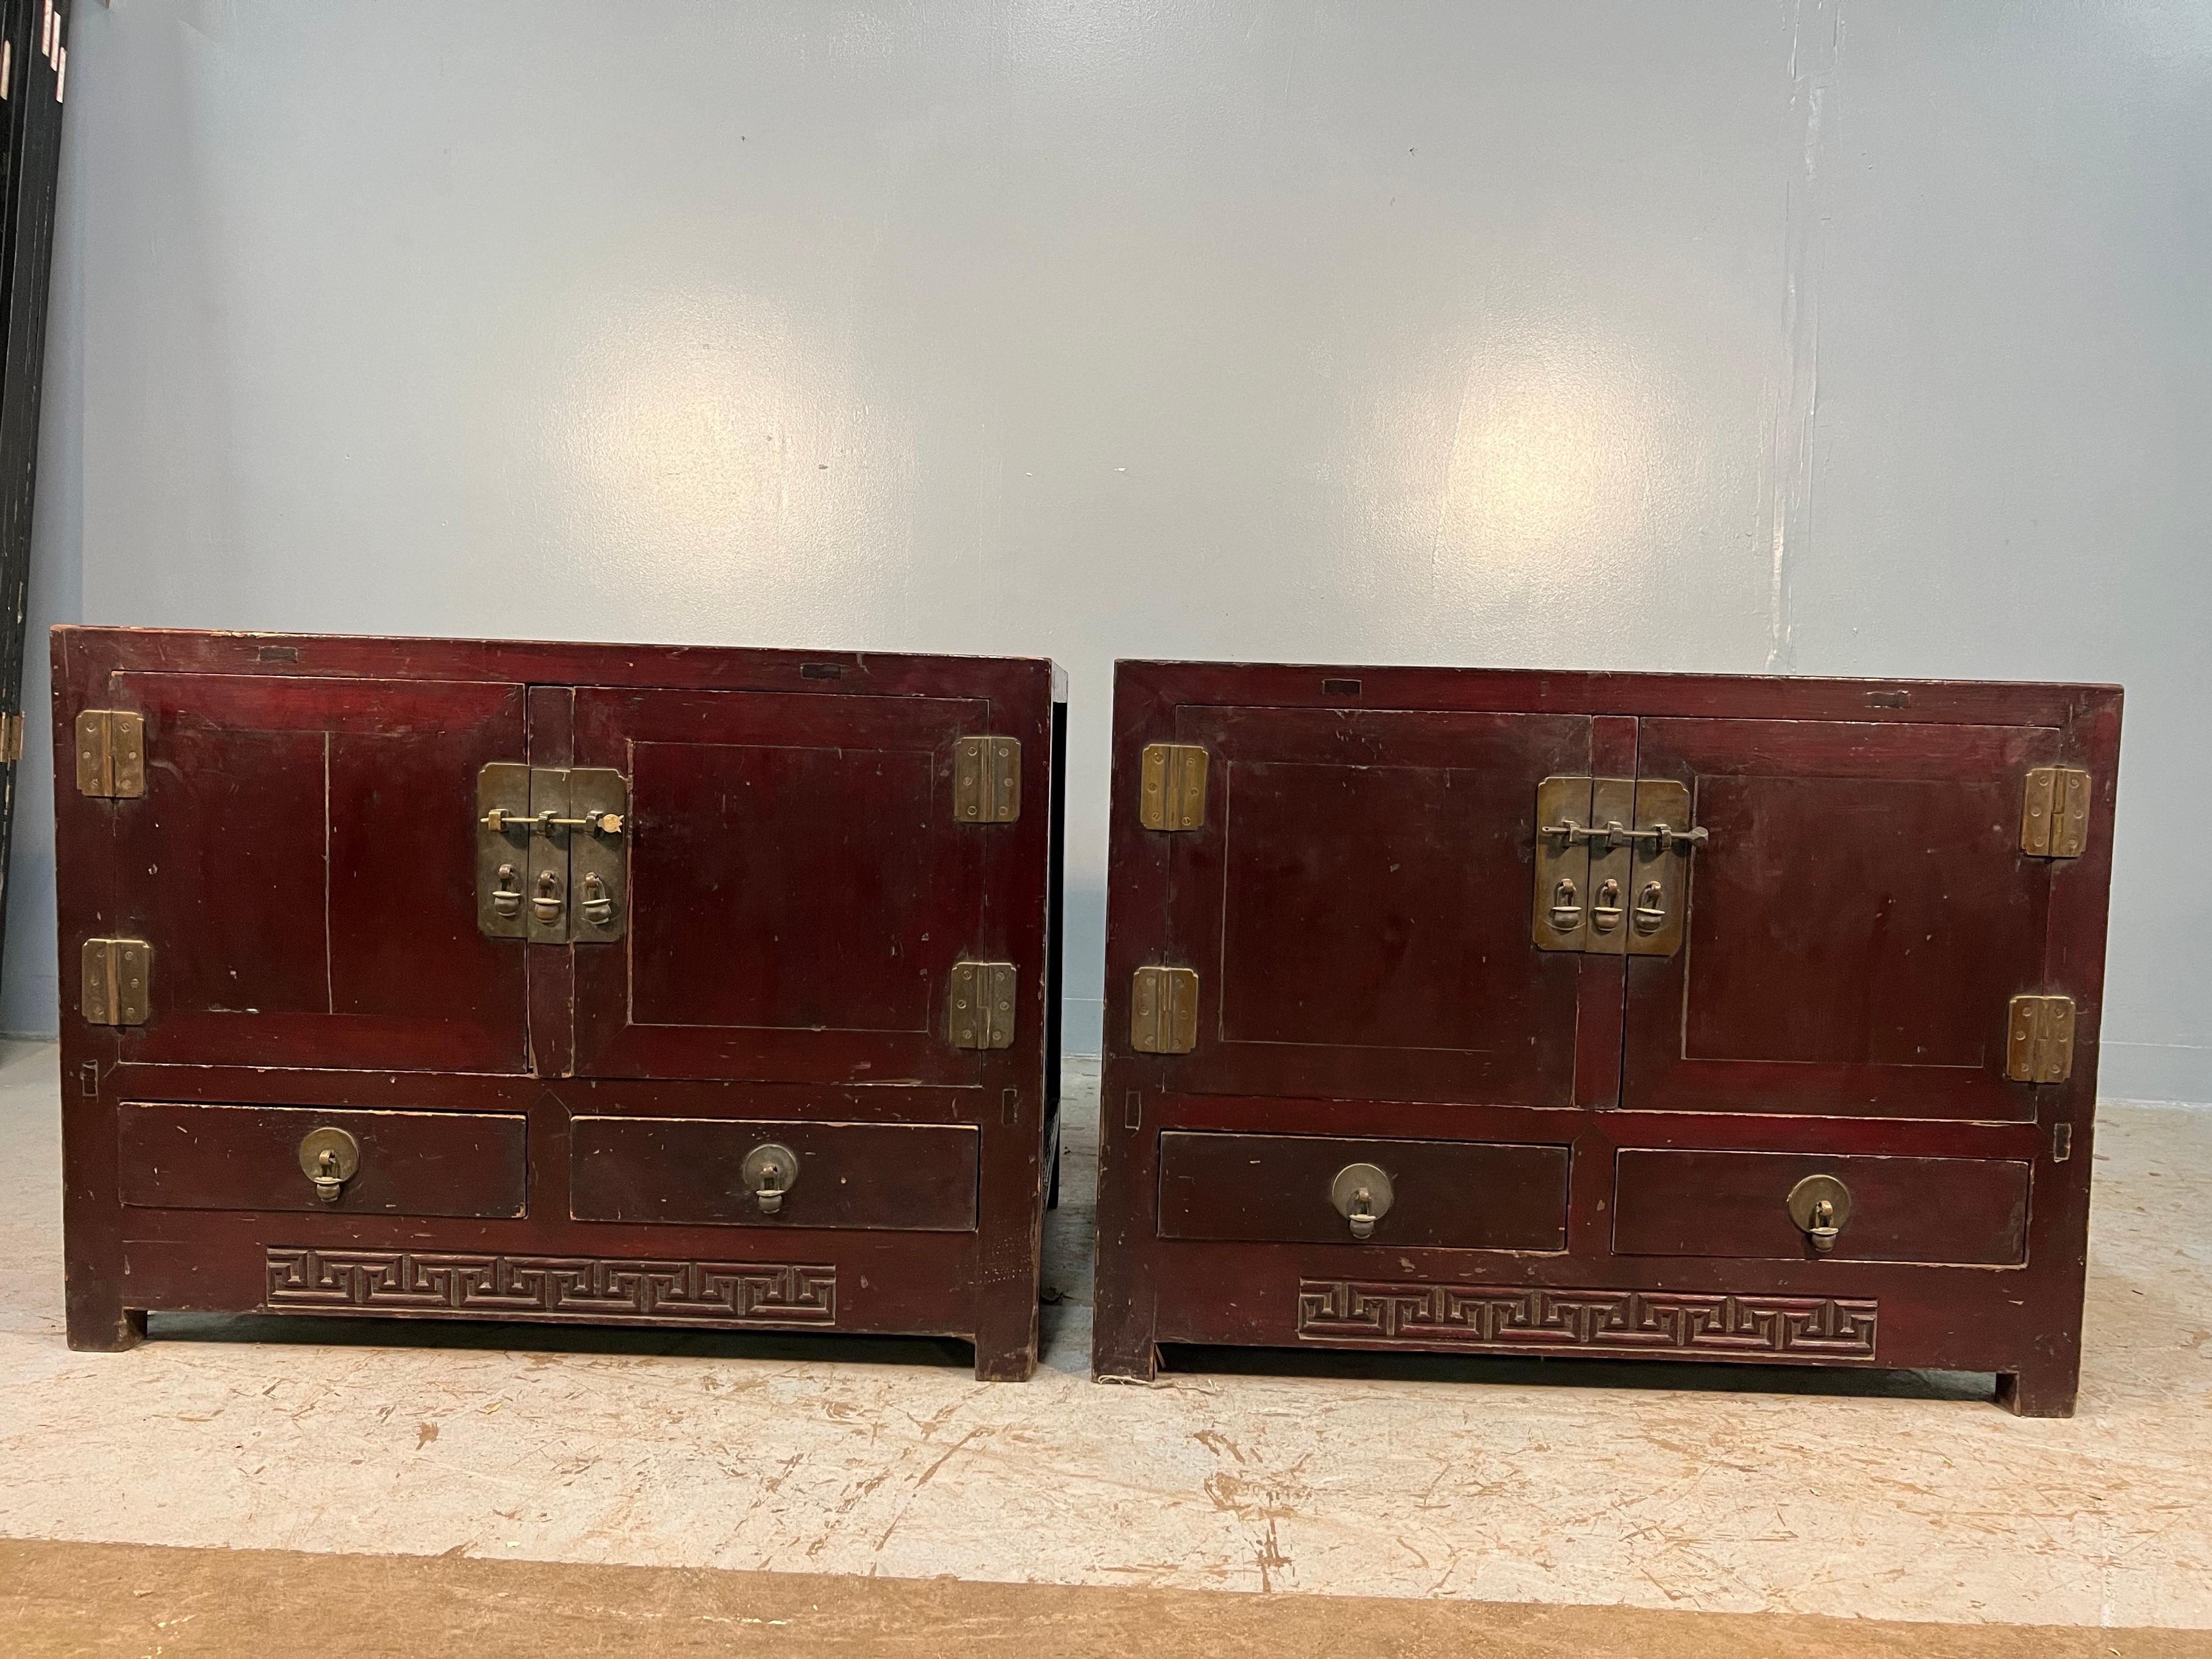 A pair of early 20th century Chinese elmwood cabinets in a old lacquered finish. This pair of cabinets would be ideal bedside chest, or end tables next to a sofa. 
They have ample storage with two drawers and two doors each.
 